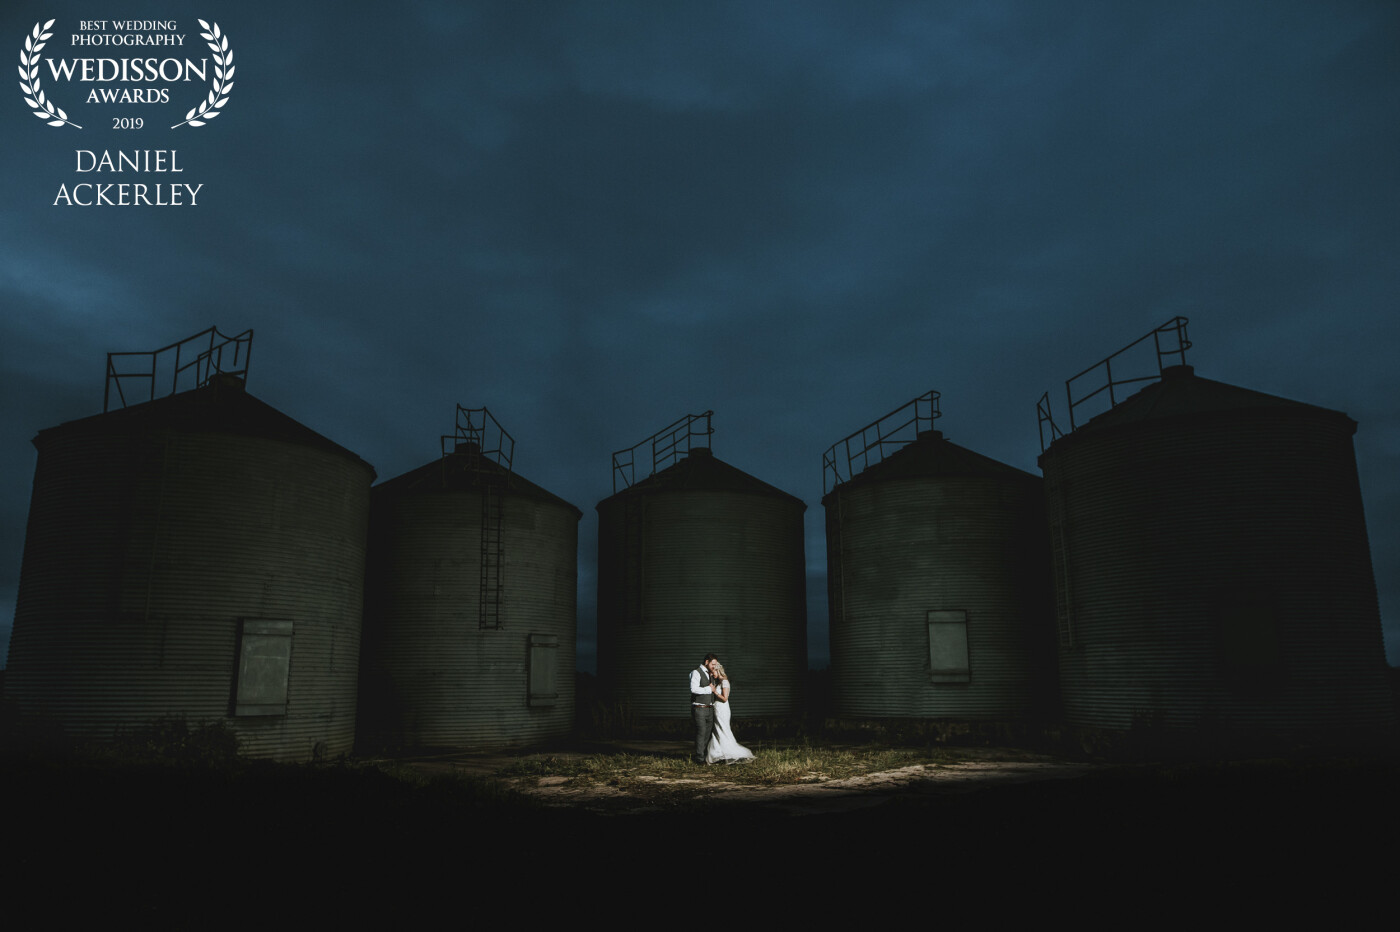 Cydney & Matt got married on an old farm, and these grain silos were just outside the main barn they were using next to the car park, and I thought they would make for an interesting back drop to a very moody and dark early evening sky. All of the light in the image was provided by a single MagMod MagBox, camera right, using a Nikon SB910 on 1/4th power. and this not only lit the couple perfectly but bounced light around the scene, providing some lovely soft front lighting on the silos. I simply edited out my assistant in PS to leave me with this final image.